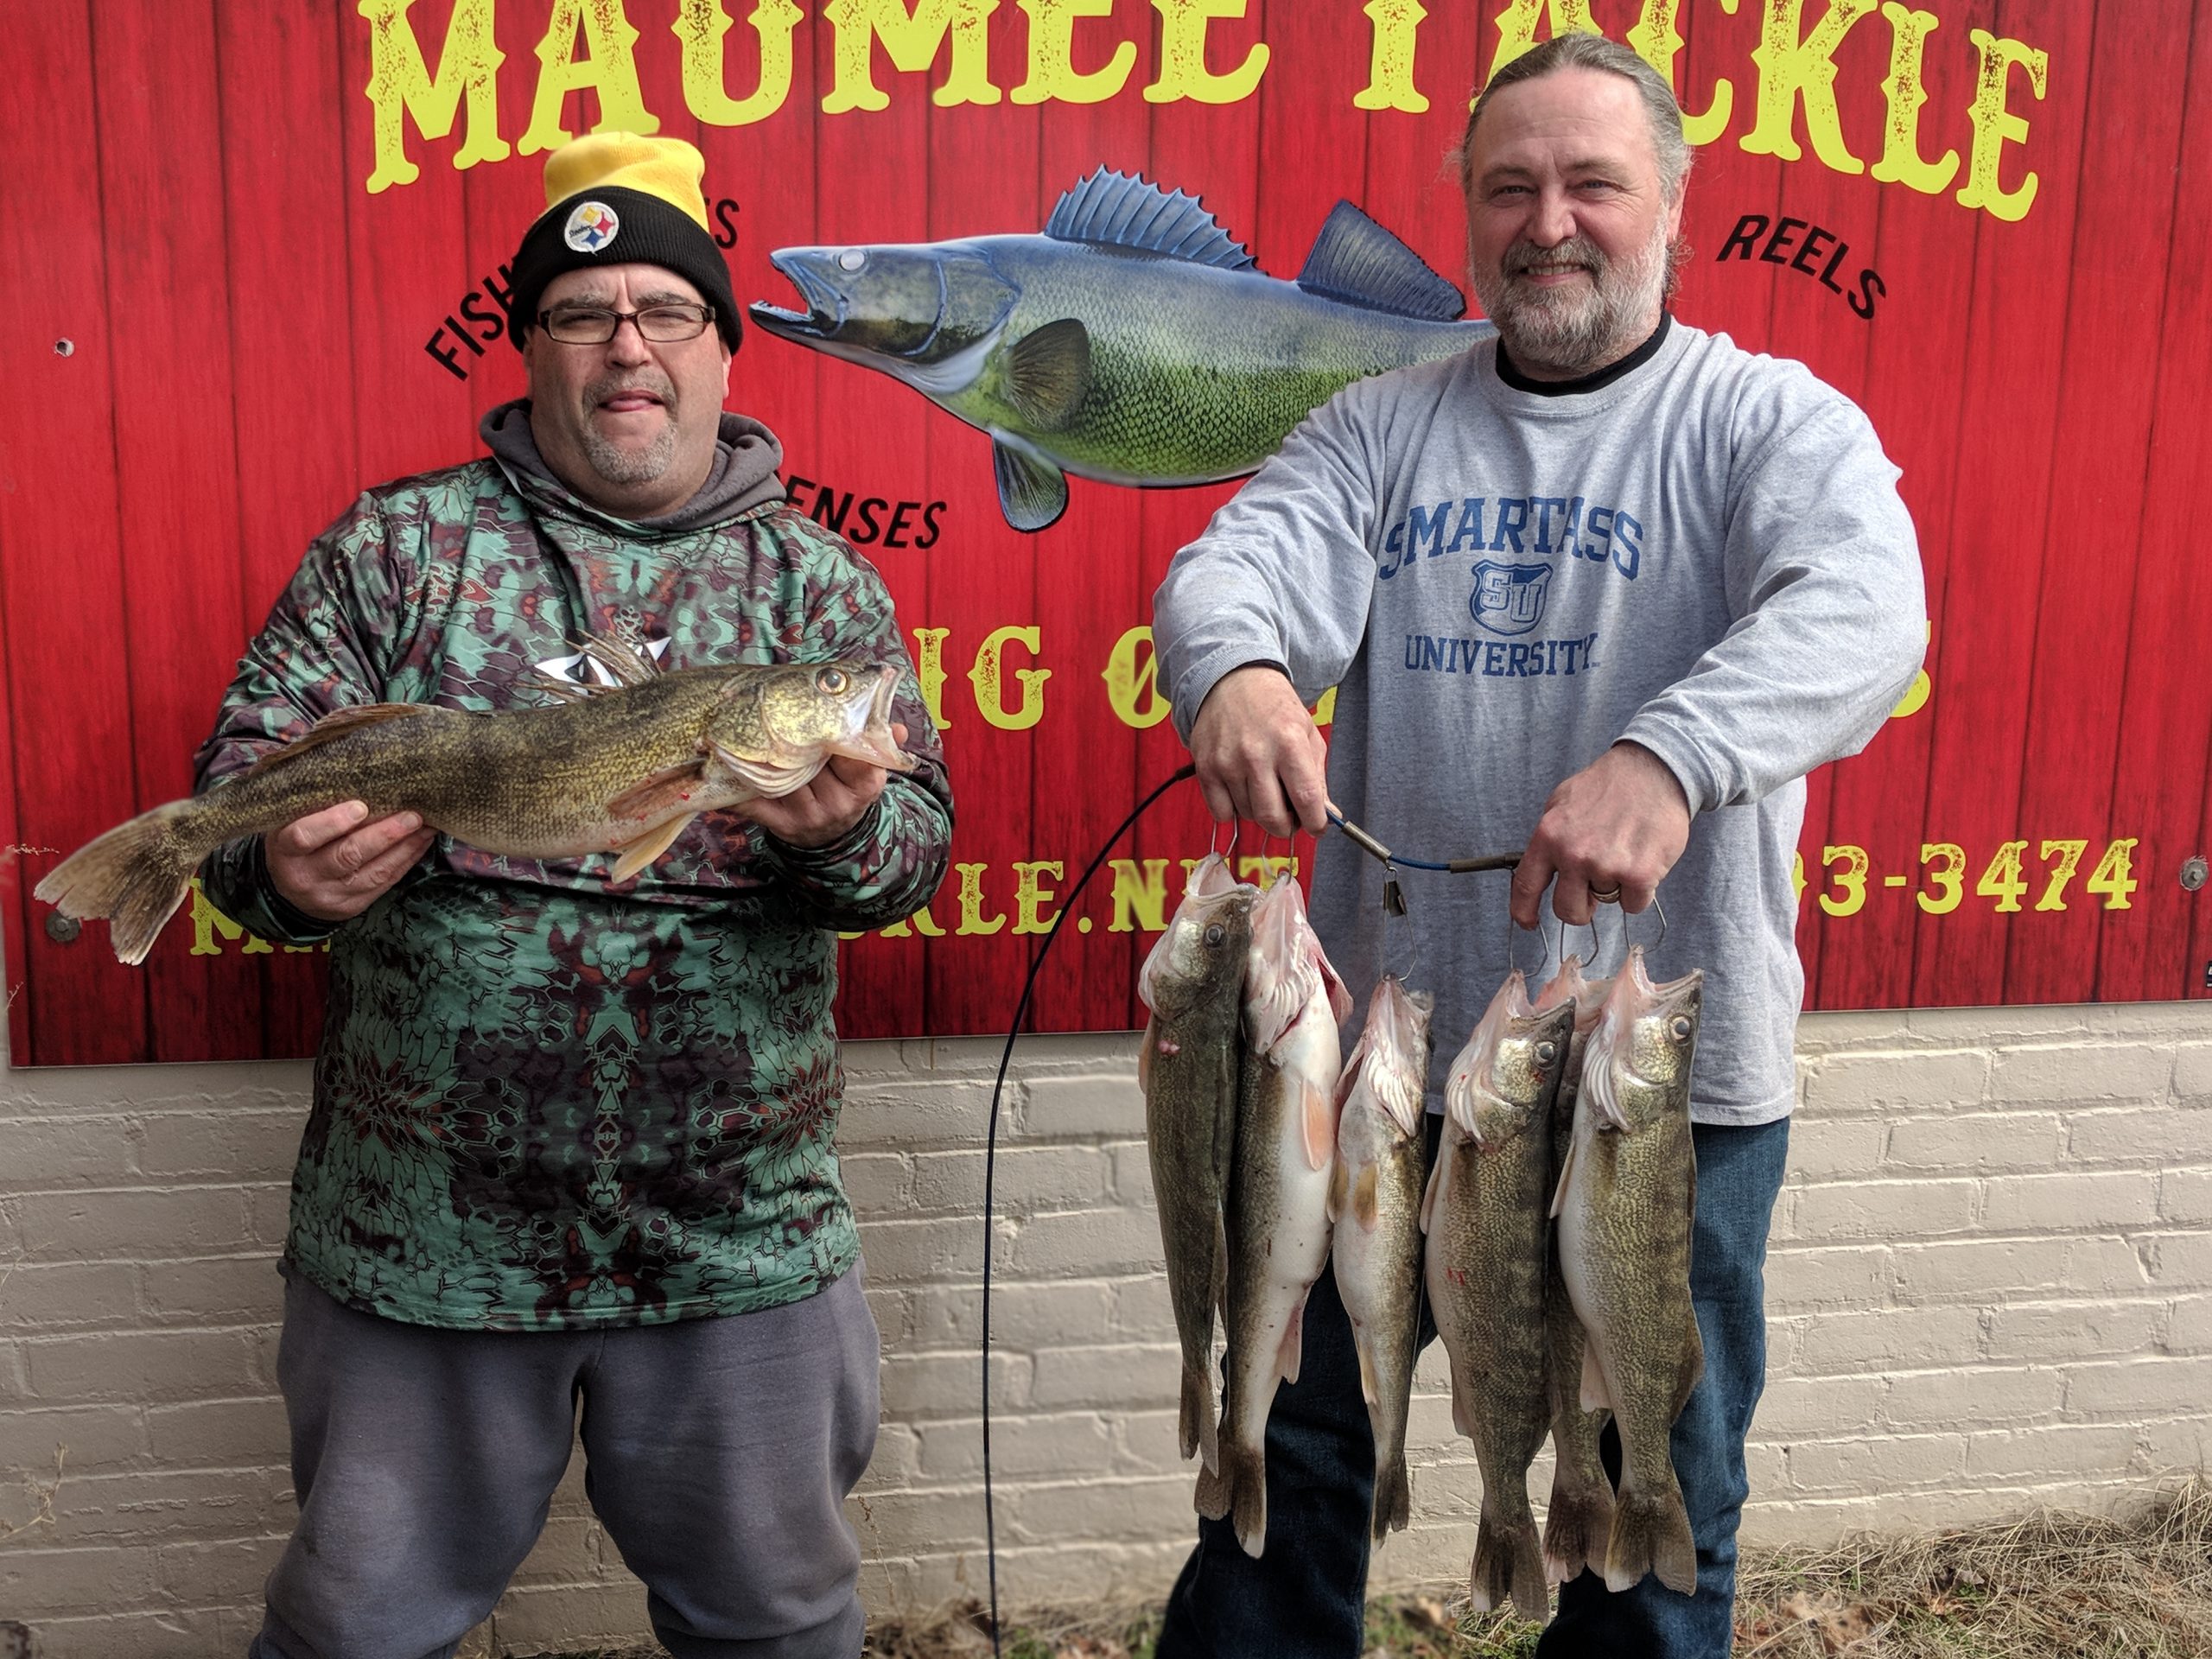 Maumee river report-17 march 2020- Enjoy your day cause life is good